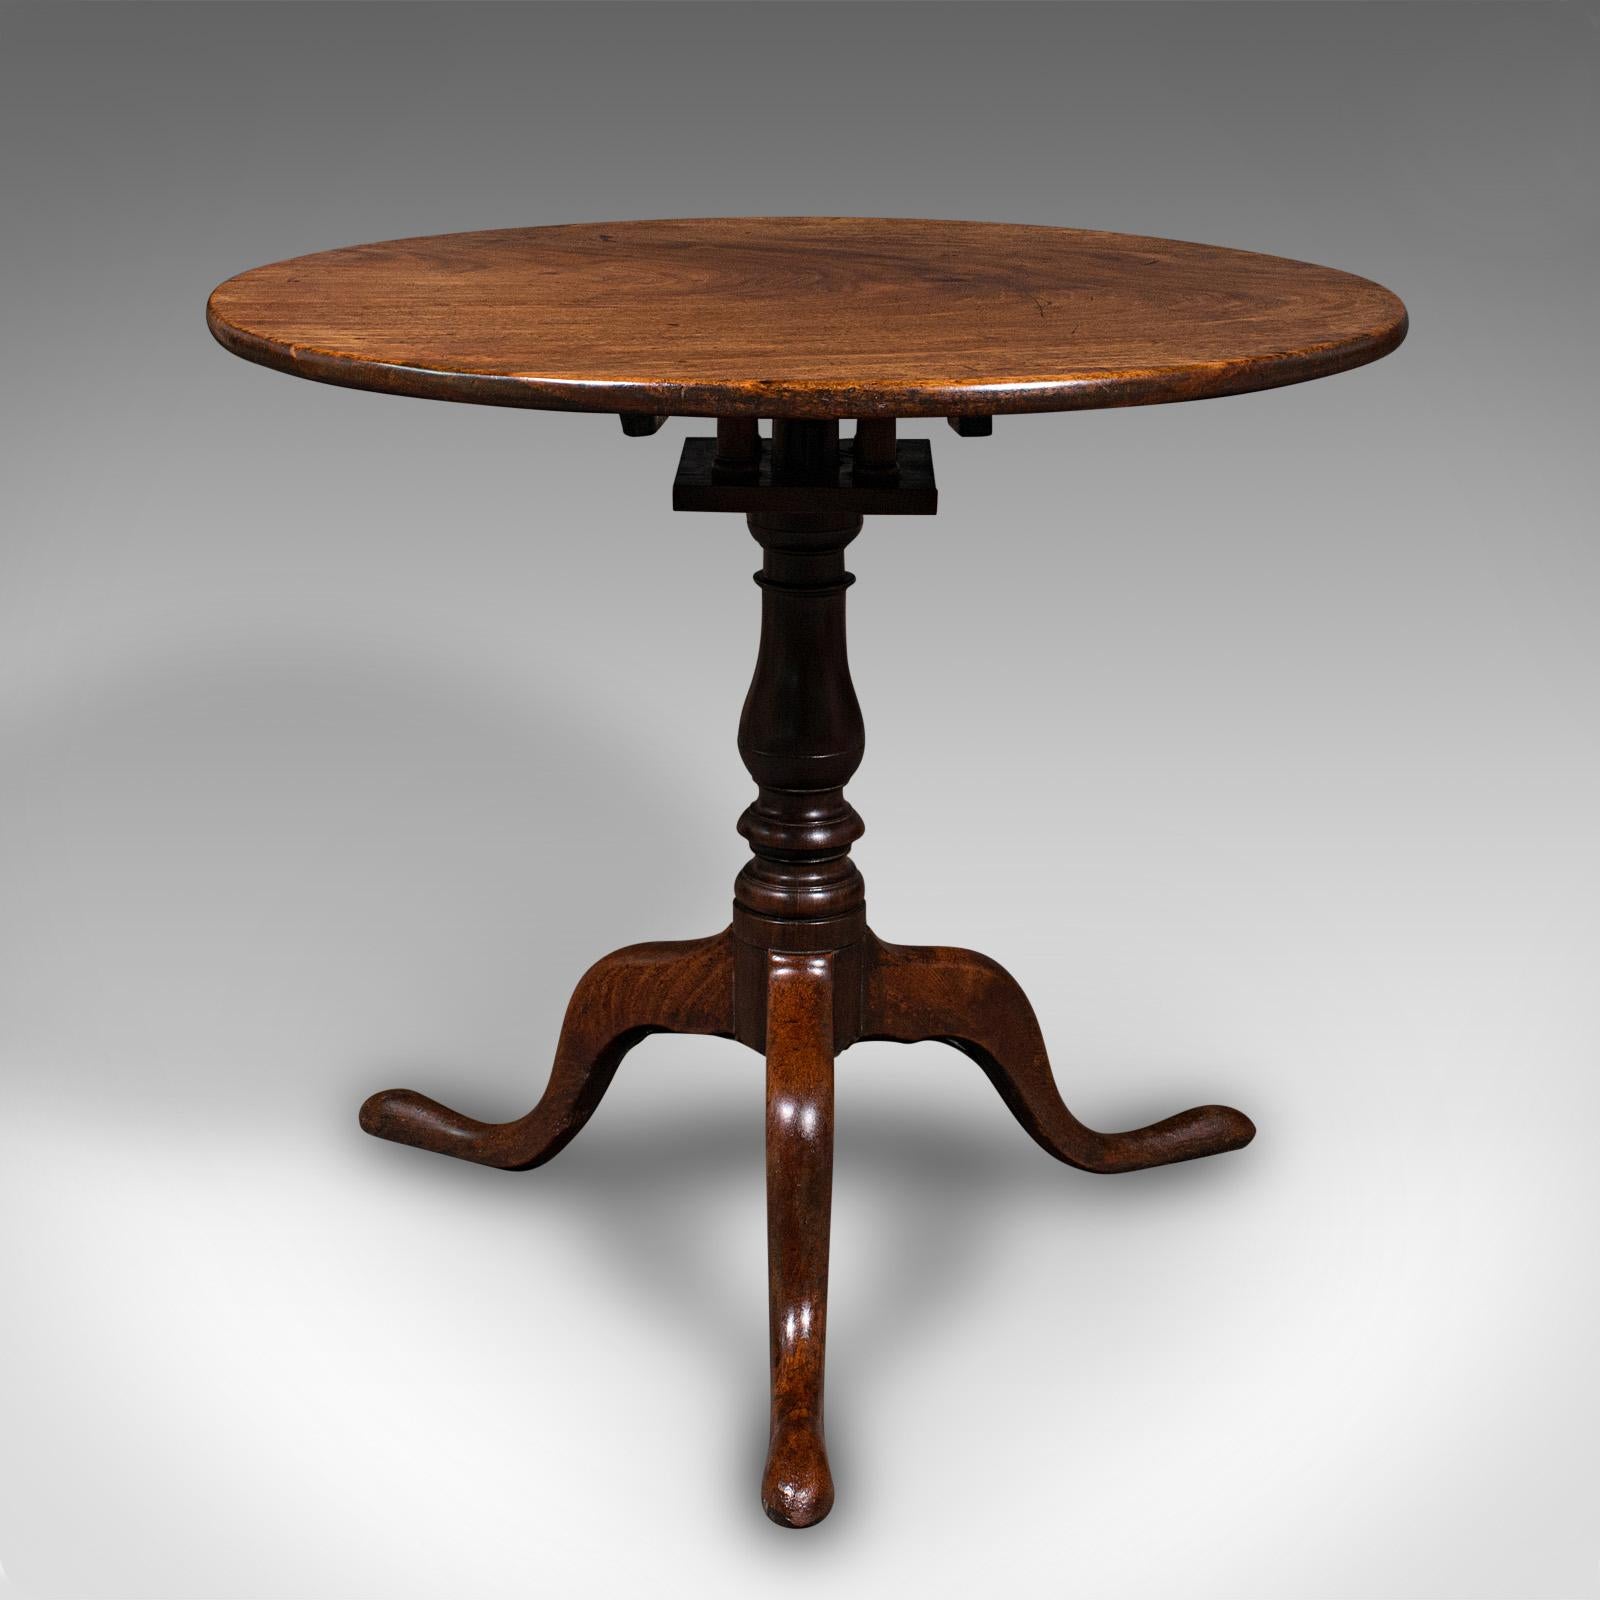 British Antique Occasional Table, English, Tilt Top, Lamp, Afternoon Tea, Georgian, 1800 For Sale